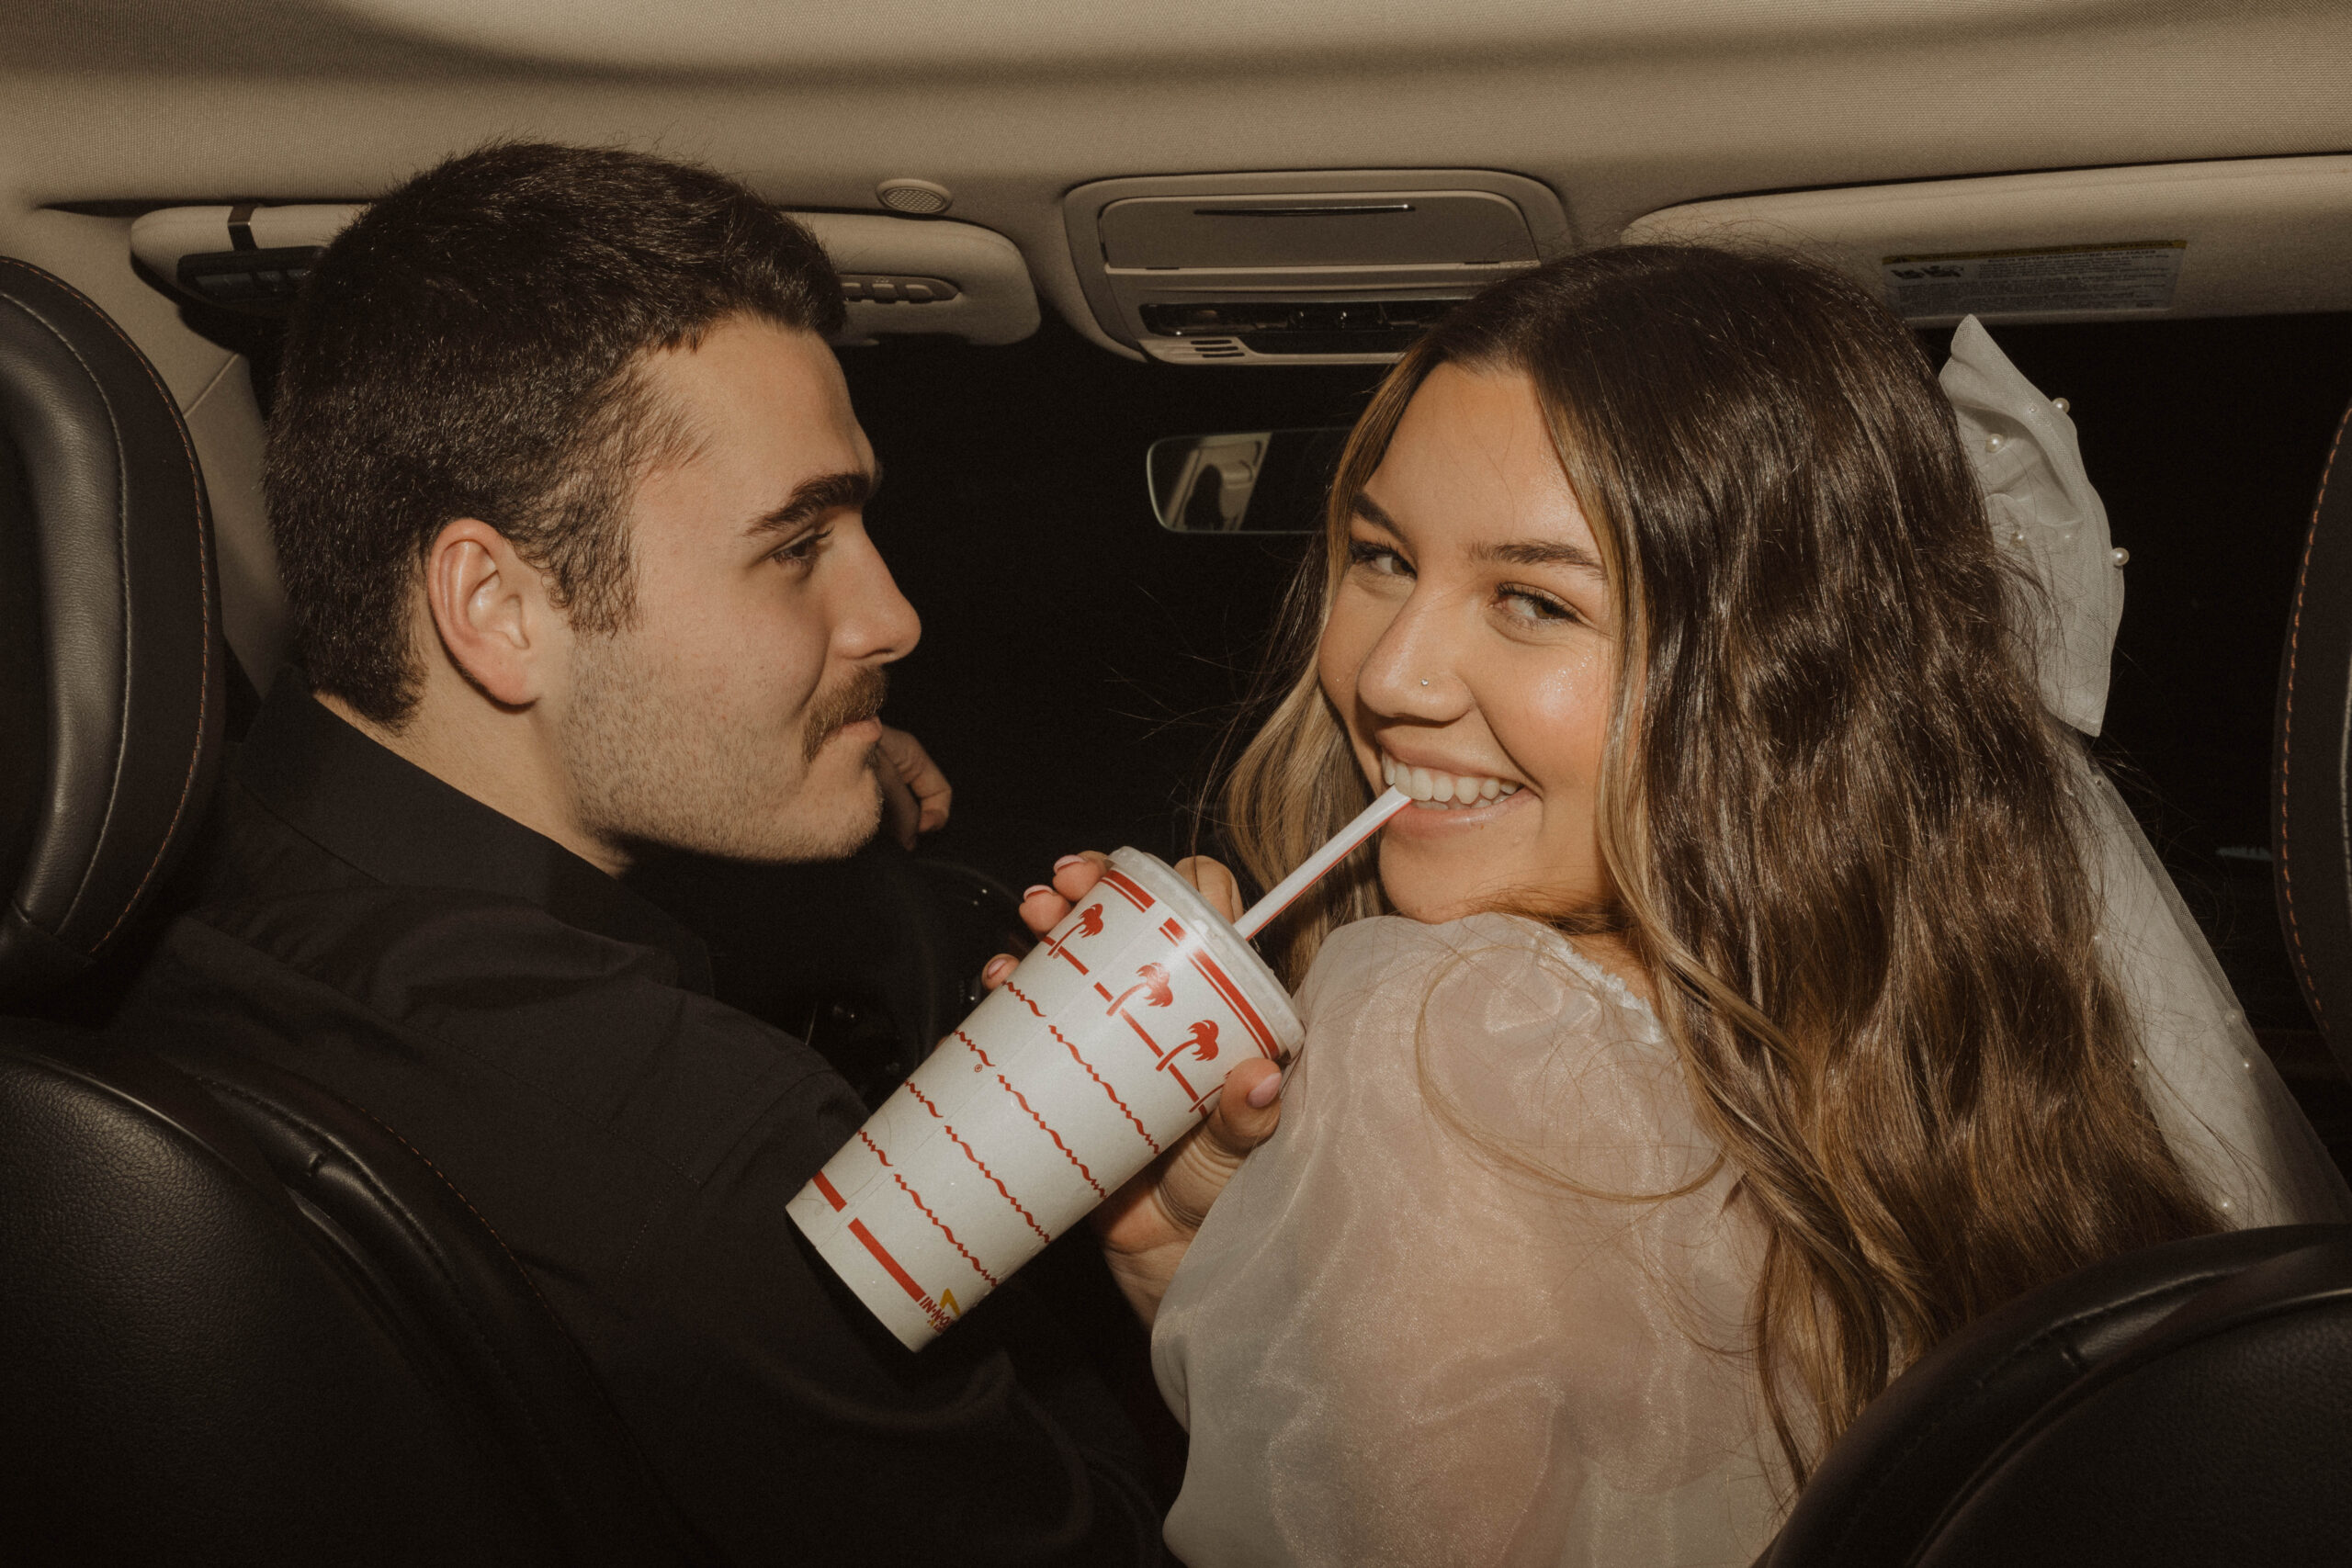 Bride and groom eating in-n-out after their wedding reception